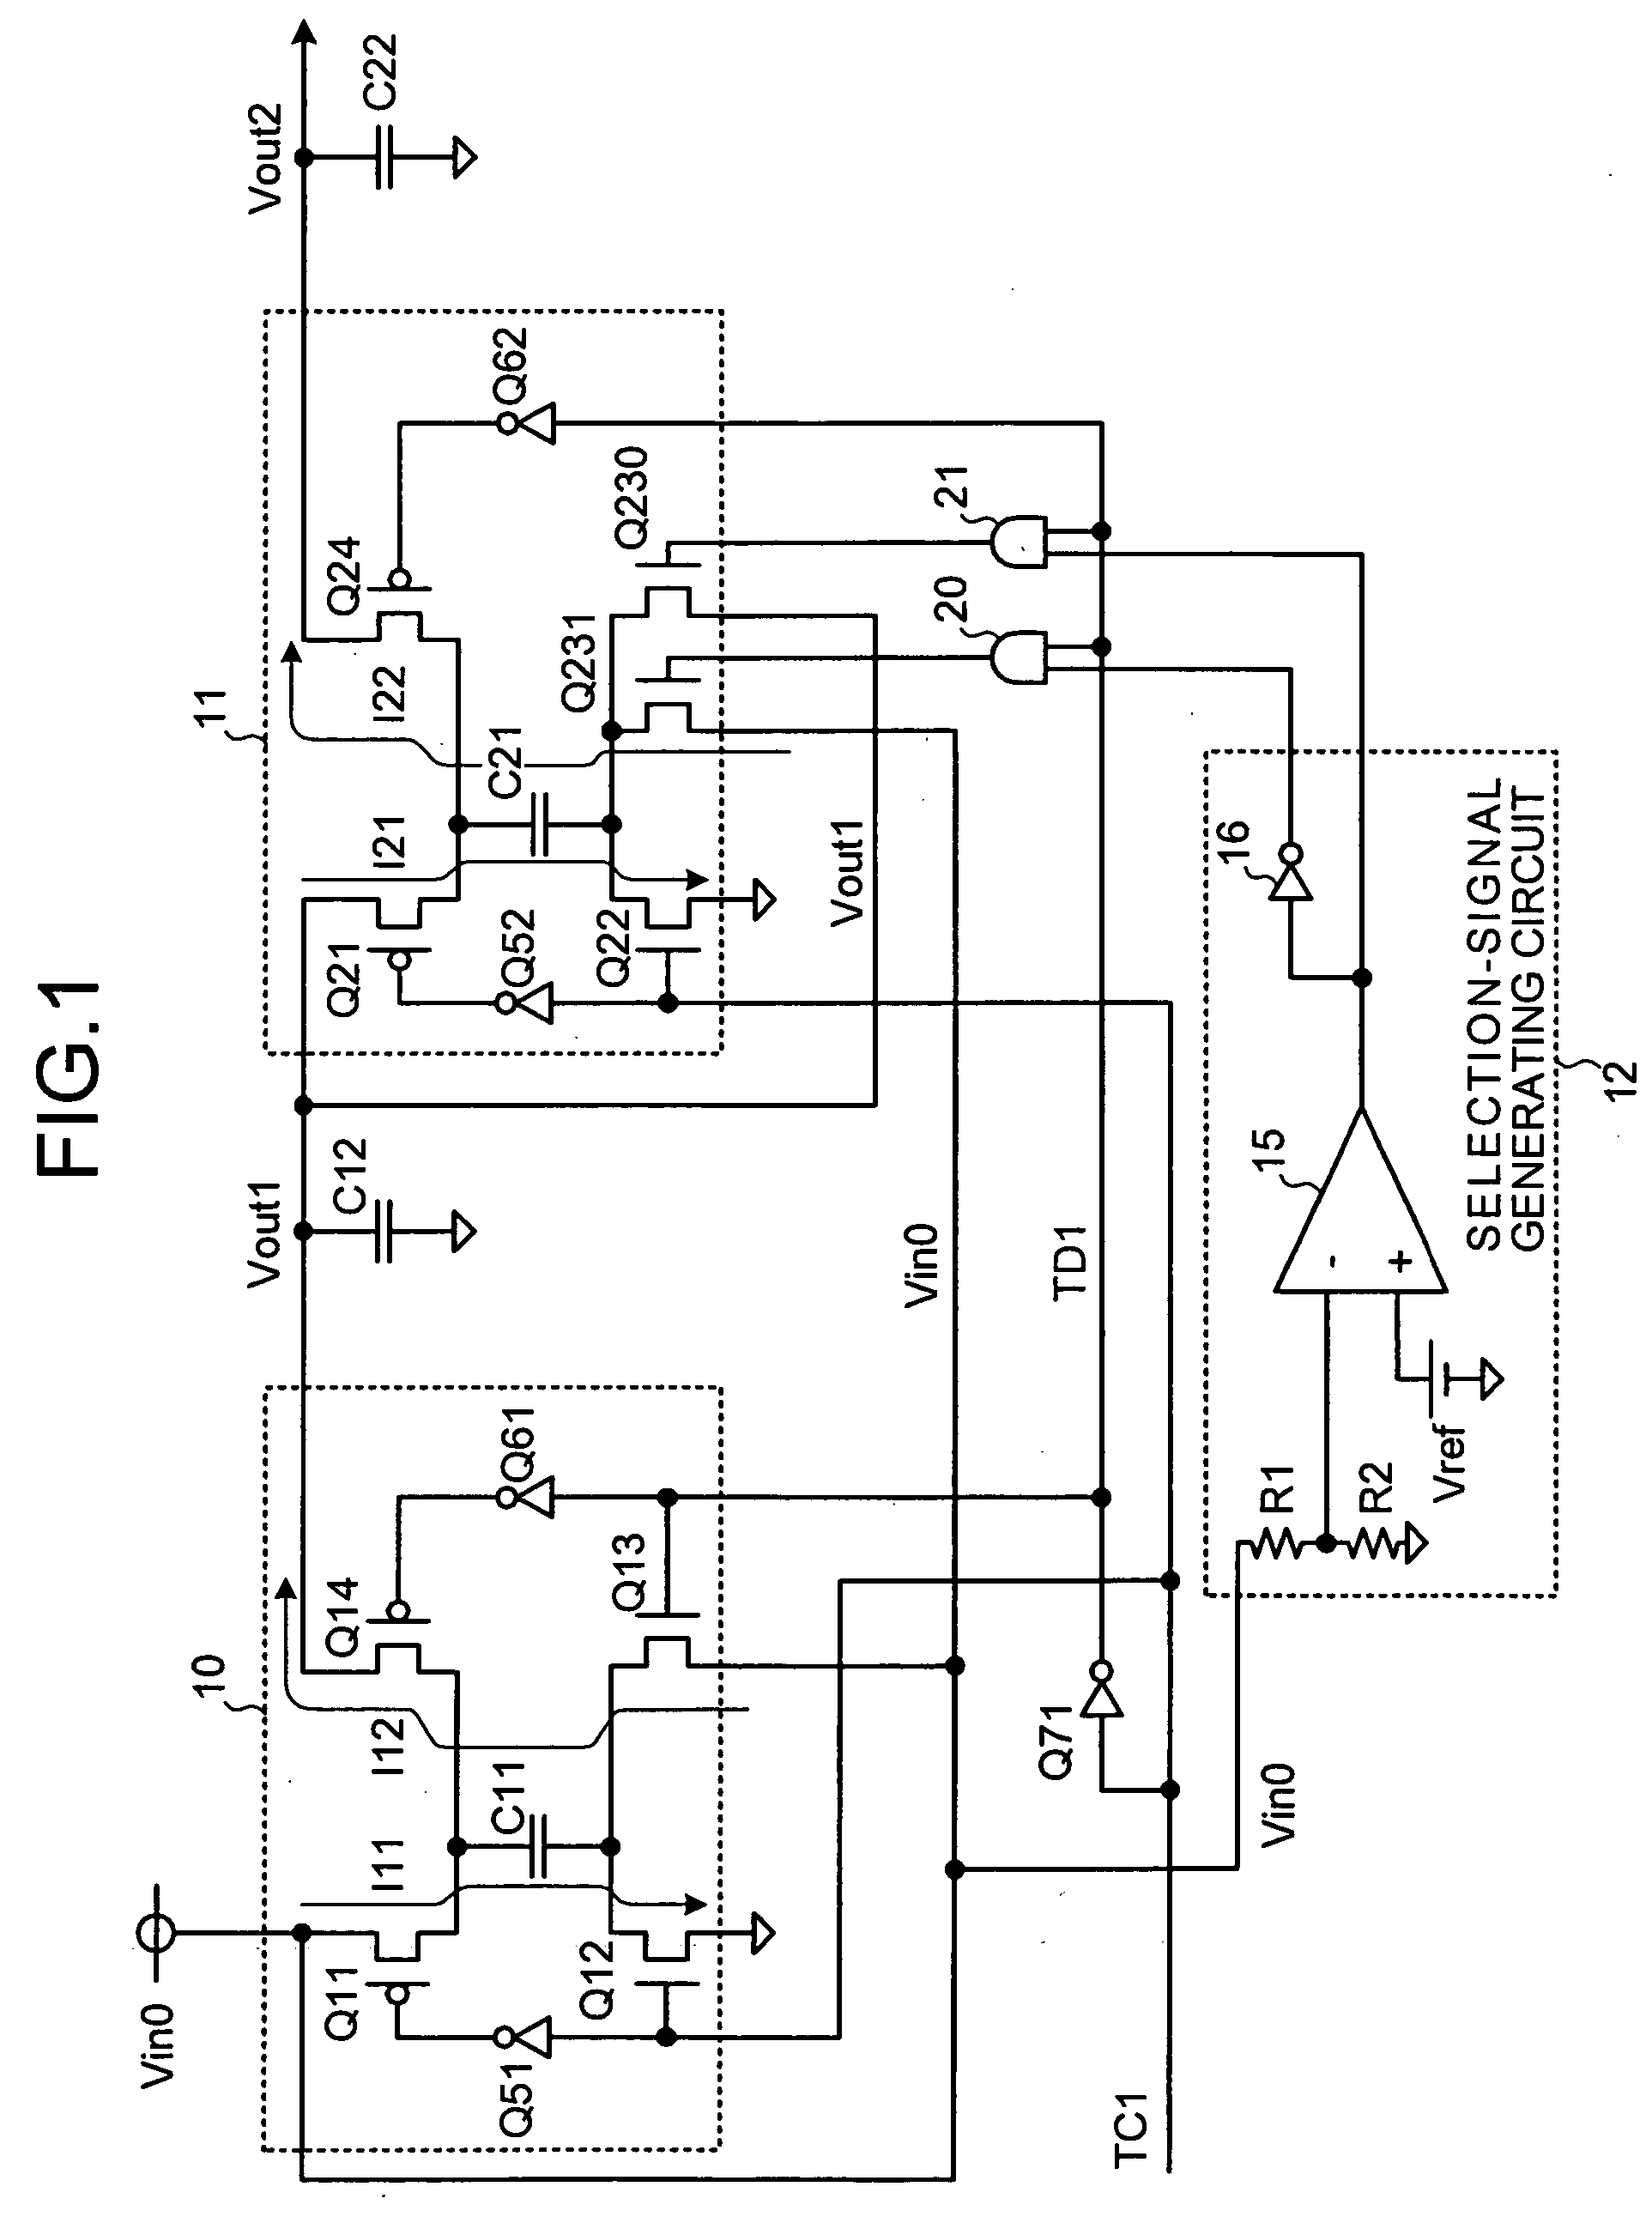 Charge-pump-type power supply circuit